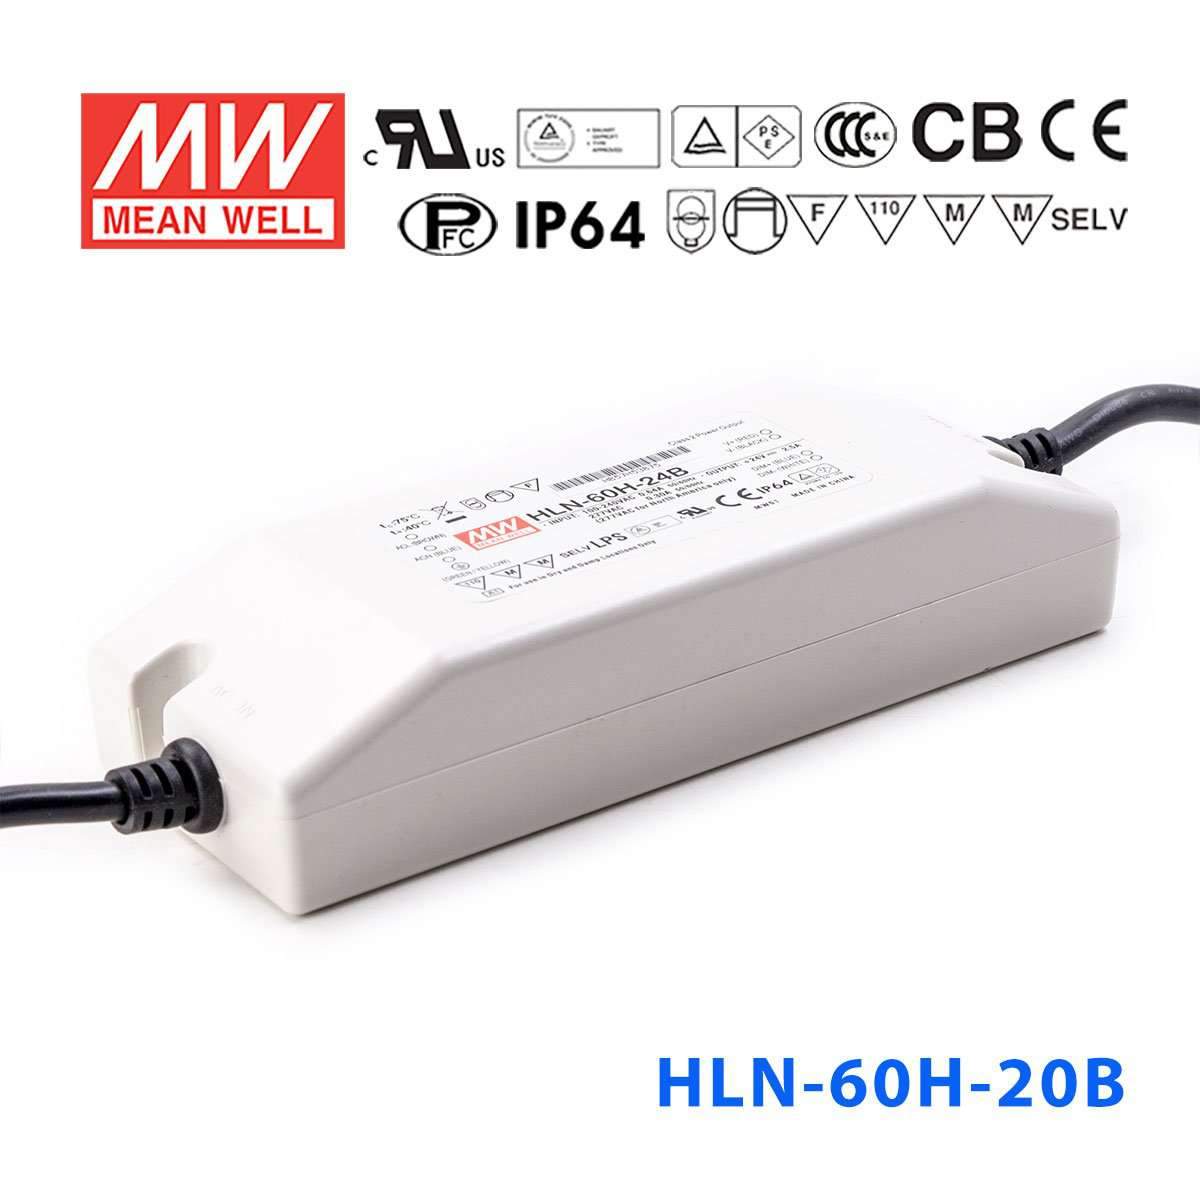 Mean Well HLN-60H-20B Power Supply 60W 20V - IP64, Dimmable